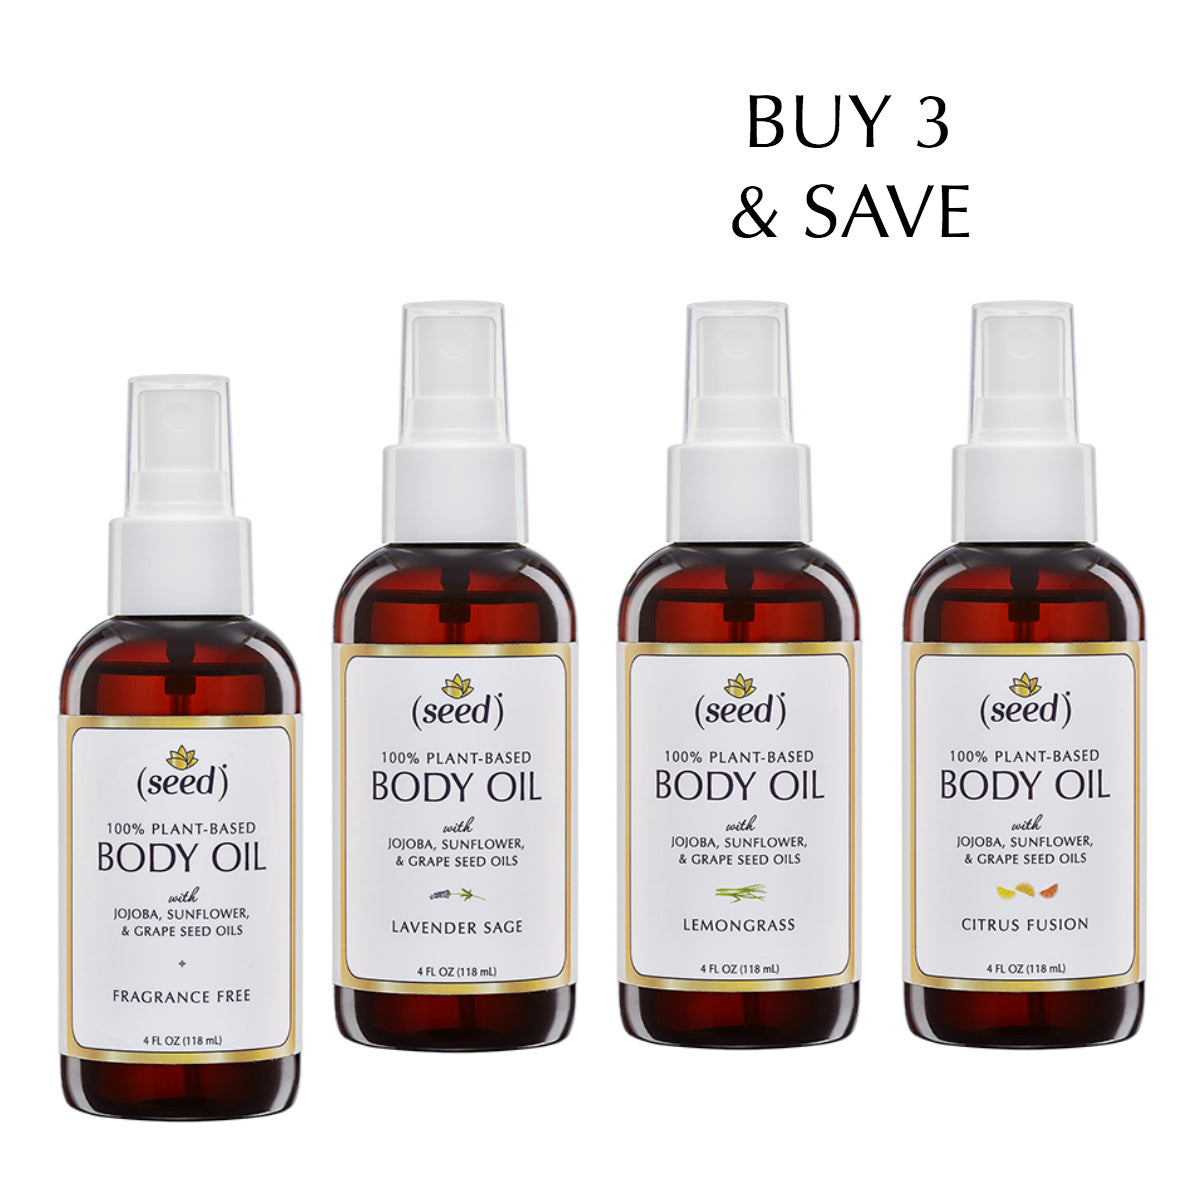 Seed Body Oil - Buy 3 and Save